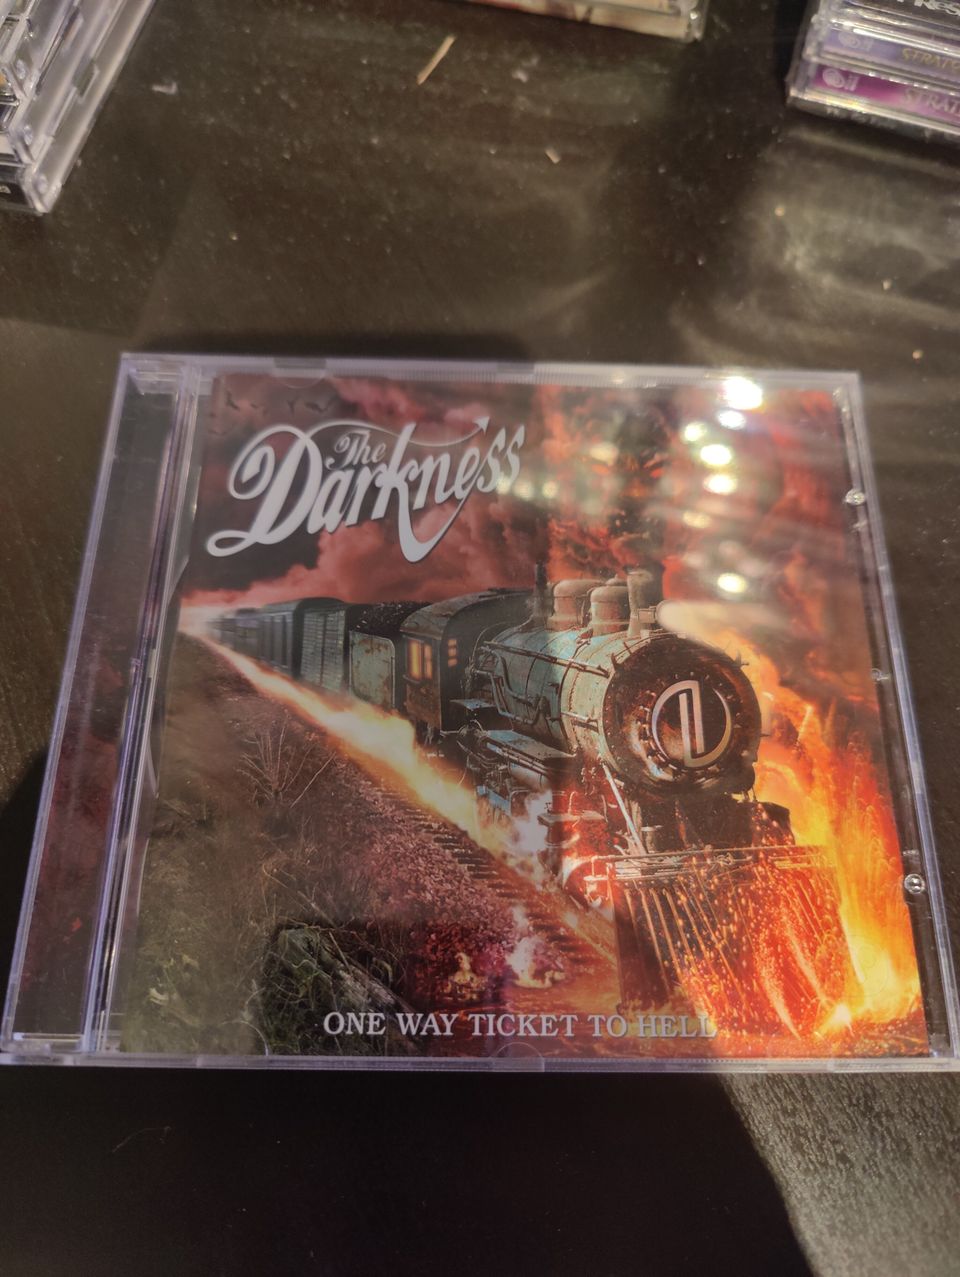 The darkness one way ticket to held cd